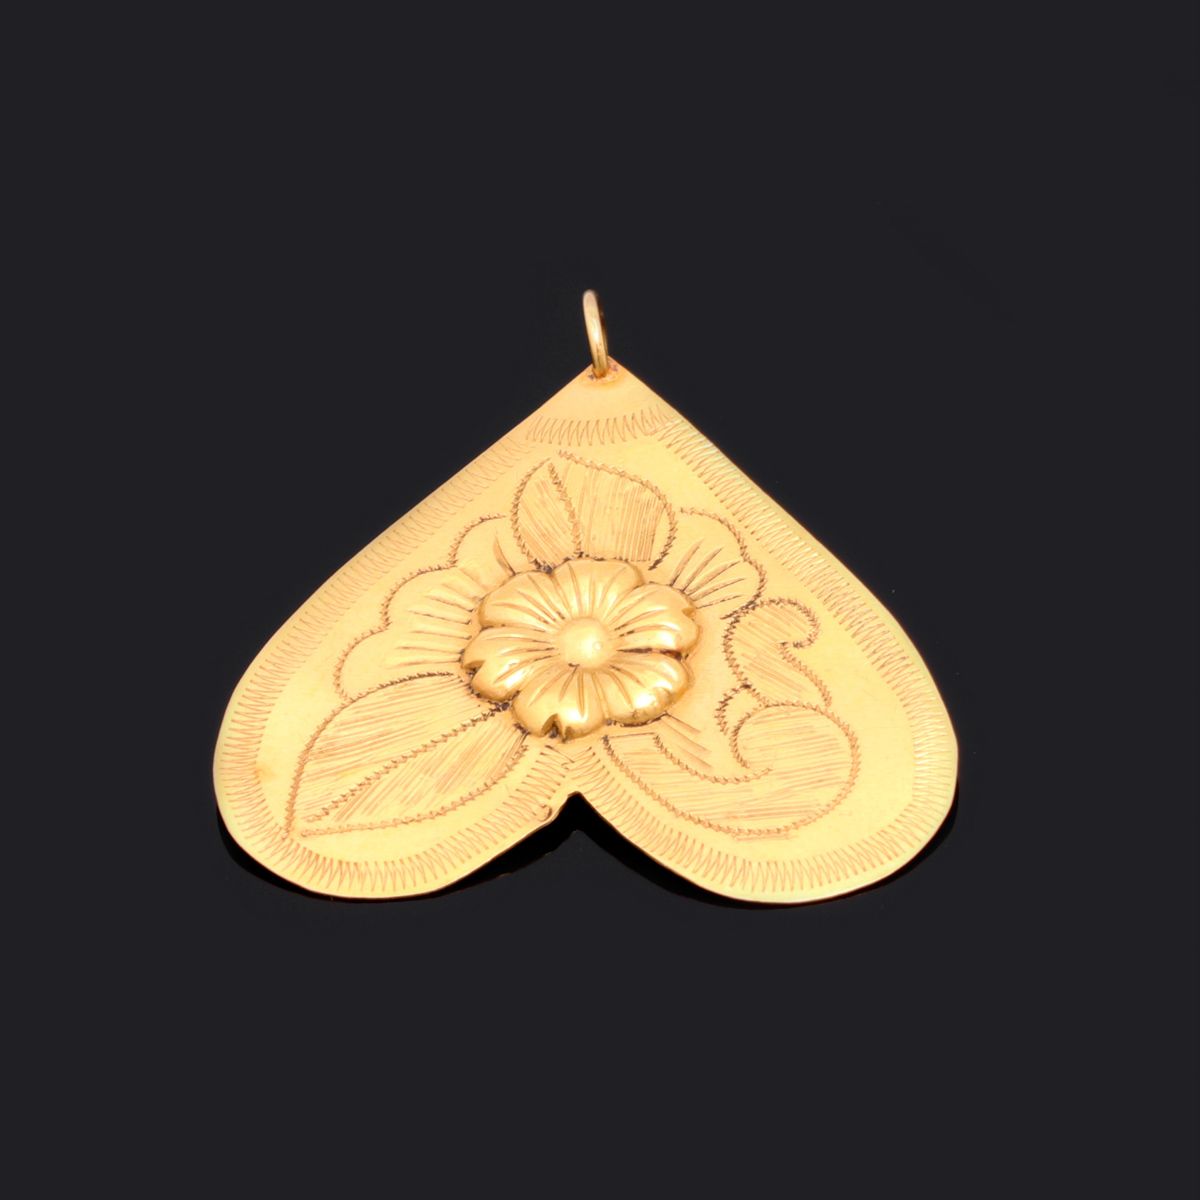 A PENDANT - BUTTERFLY A PENDANT - BUTTERFLY 800/000 gold, engraved decoration, P&hellip;